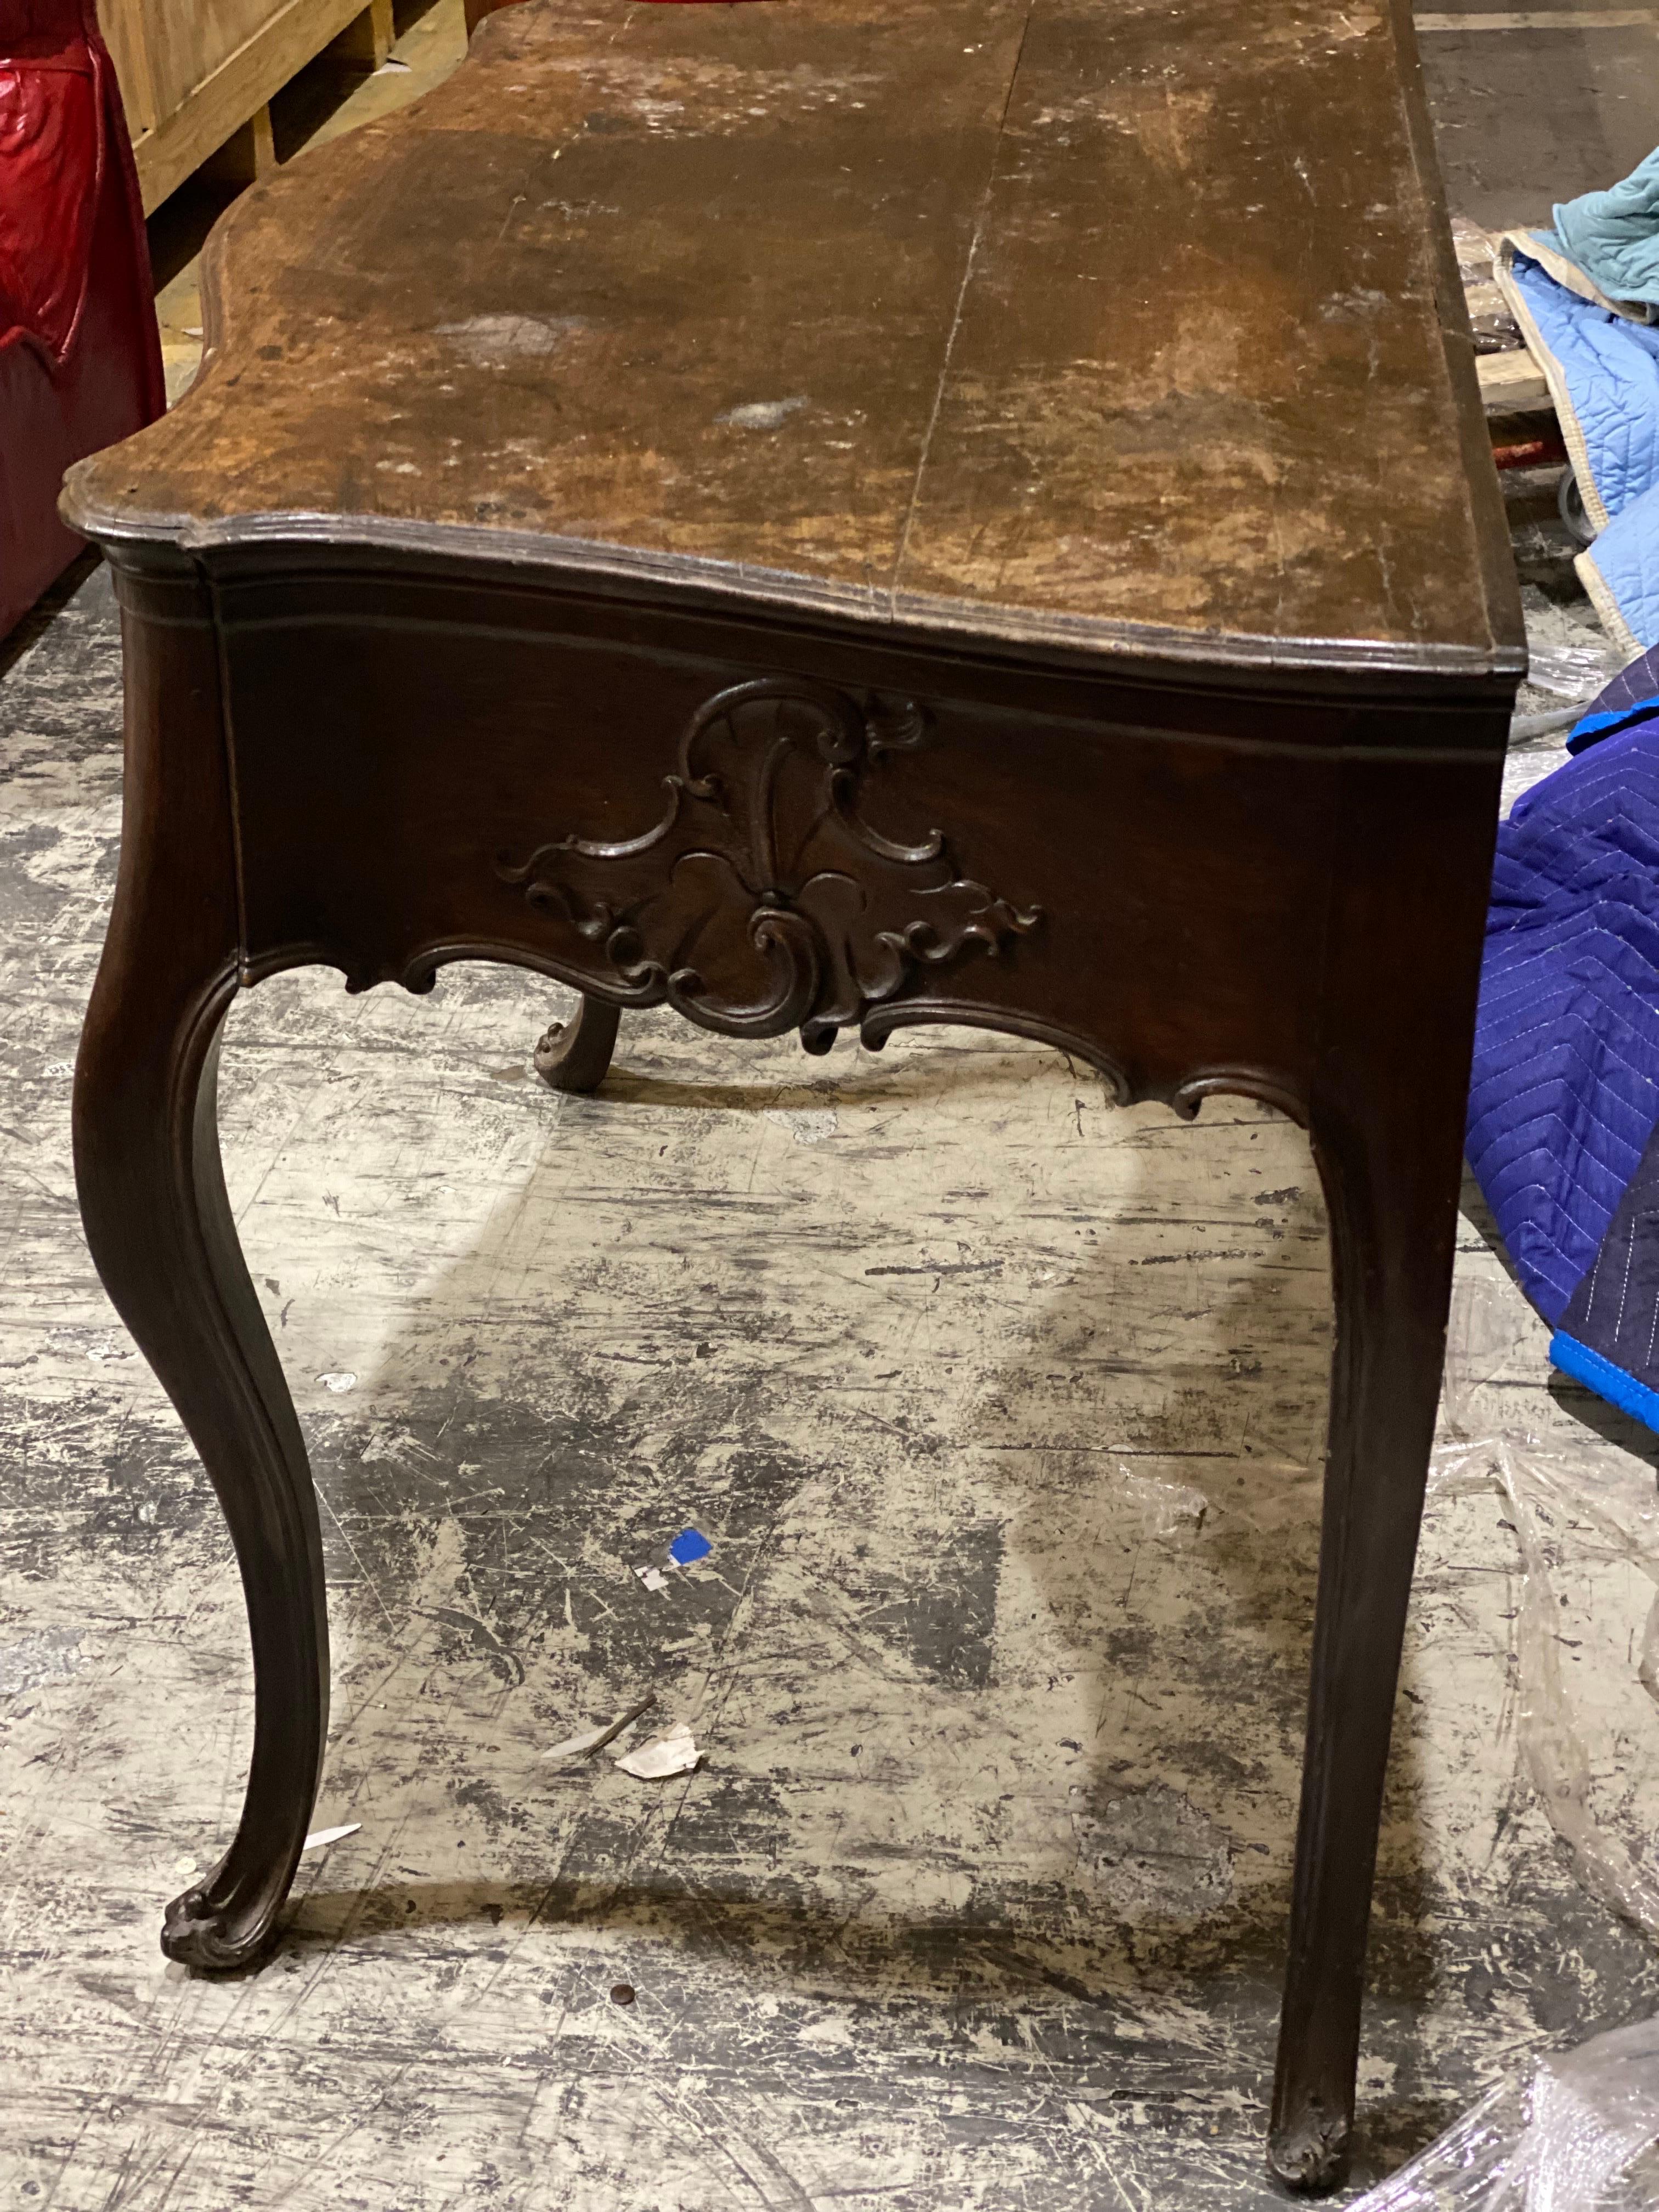 19th C French Louis XV Style Carved Walnut Two Drawer Table
A beautifully carved serpentine shaped table with two drawers and classic Louis XV detailing. Original hardware. Previous restorations visible on front right drawer. Chip on front left